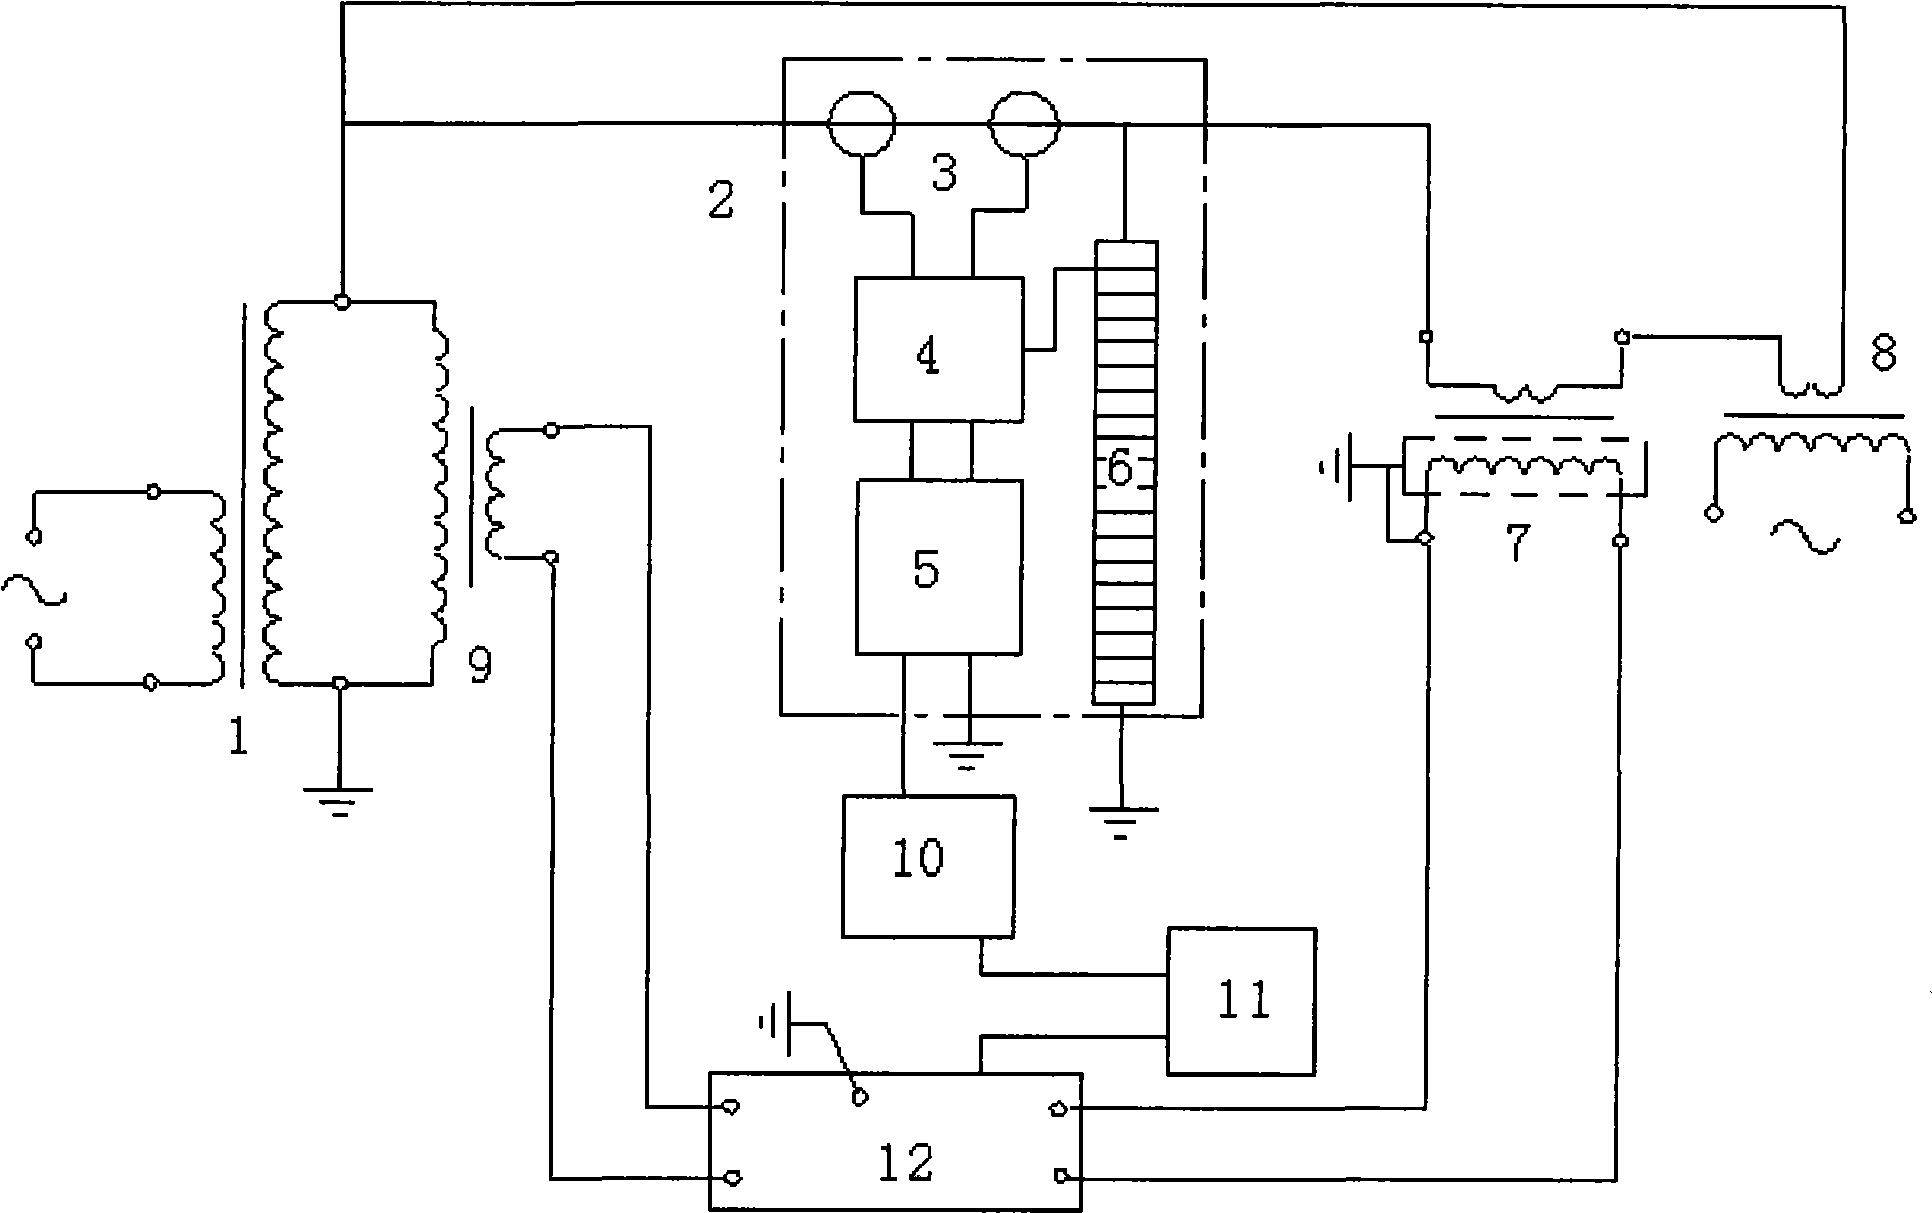 Calibration apparatus for gate energy meter of digitized transforming plant